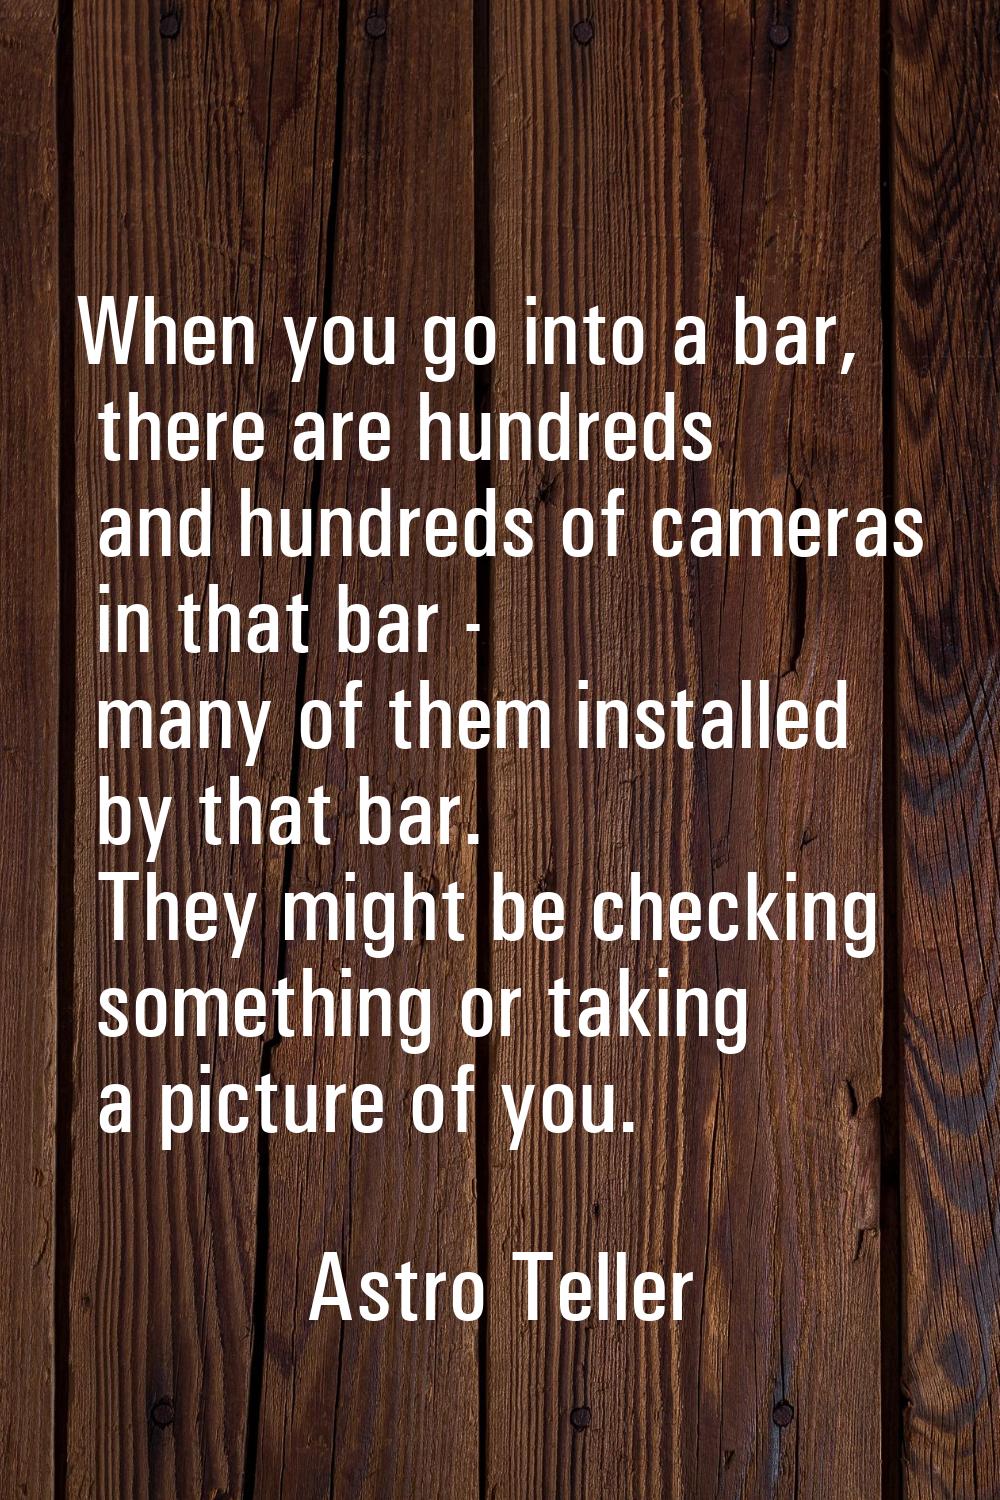 When you go into a bar, there are hundreds and hundreds of cameras in that bar - many of them insta